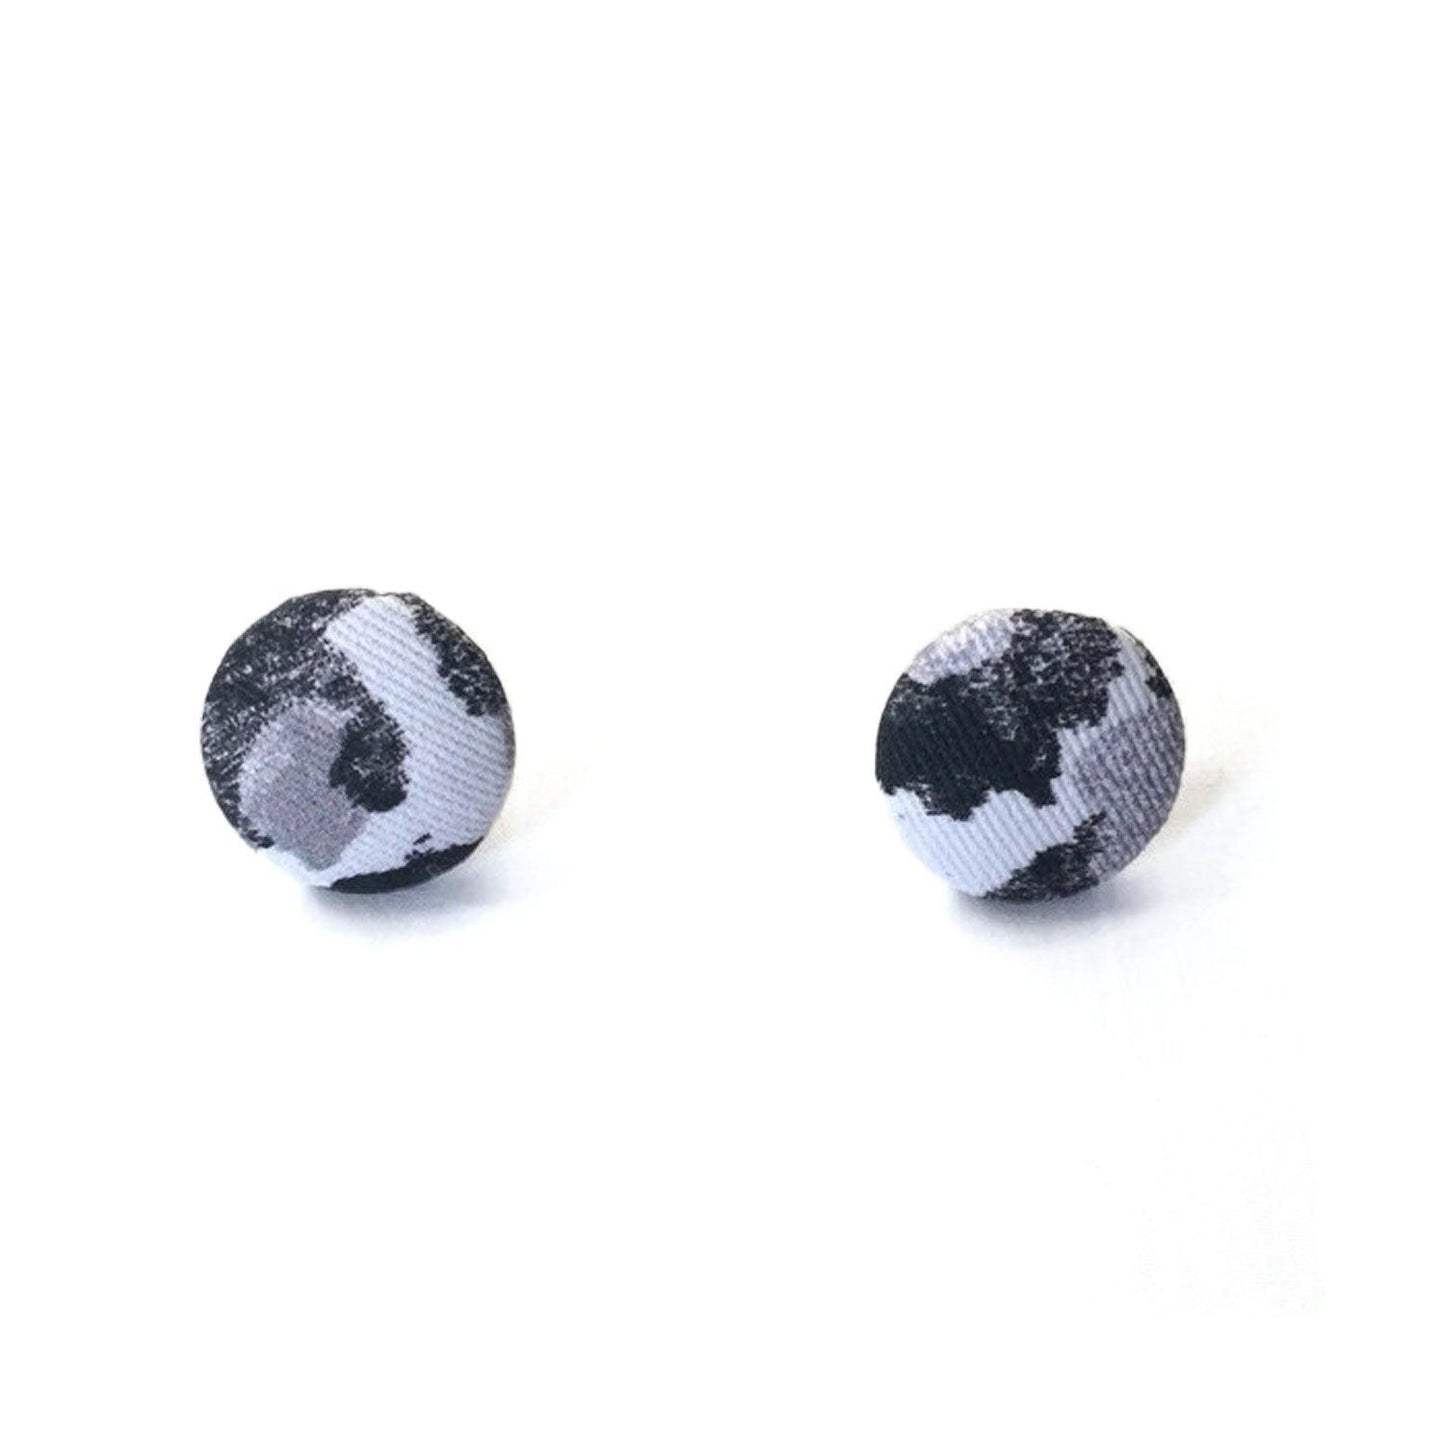 Fabric Covered Button Earrings With Torto B&W Pattern - OlaOla